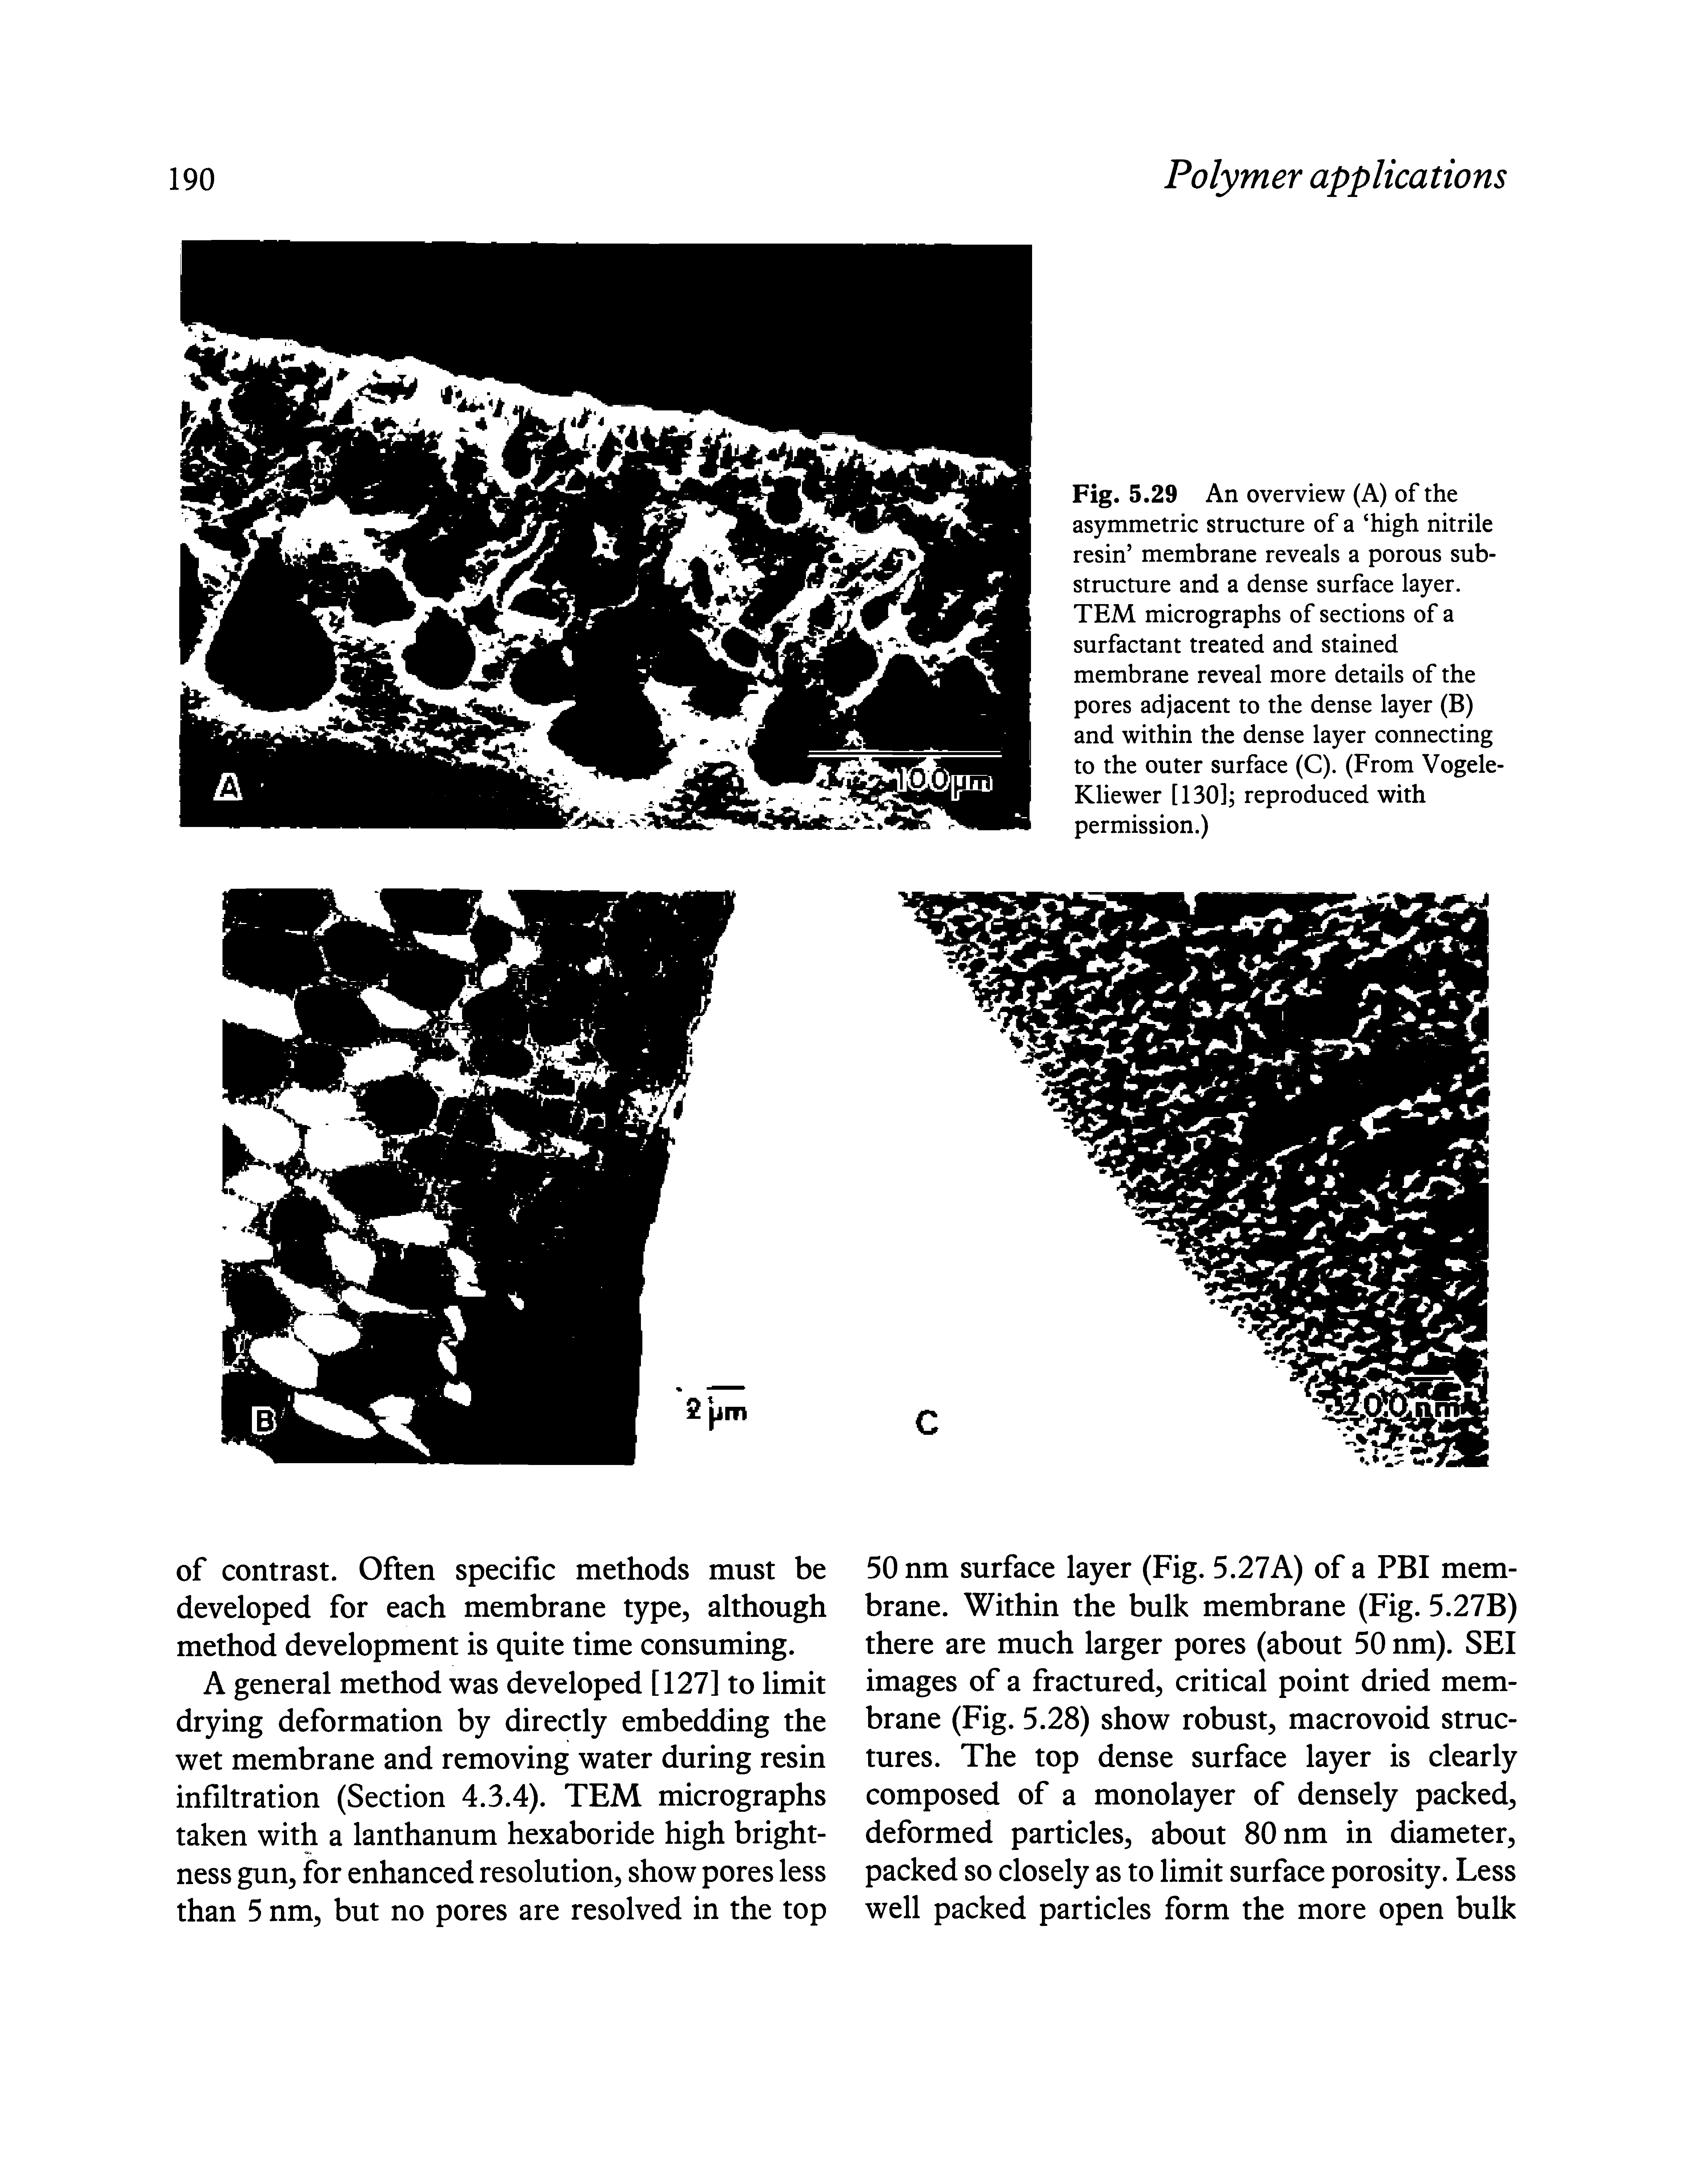 Fig. 5.29 An overview (A) of the asymmetric structure of a high nitrile resin membrane reveals a porous substructure and a dense surface layer. TEM micrographs of sections of a surfactant treated and stained membrane reveal more details of the pores adjacent to the dense layer (B) and within the dense layer connecting to the outer surface (C). (From Vogele-Kliewer [130] reproduced with permission.)...